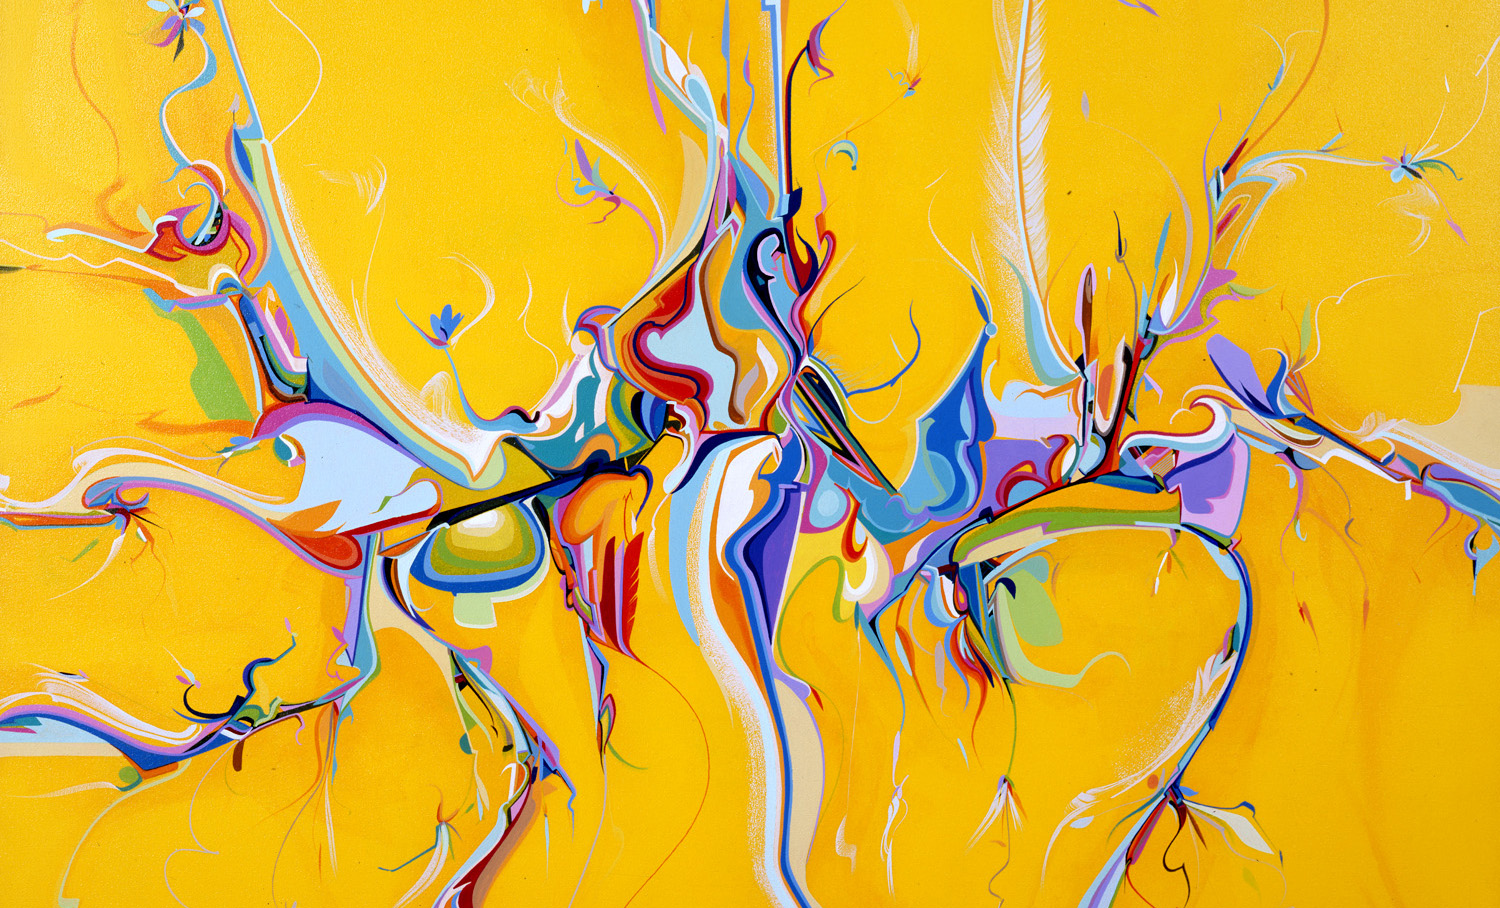 Yellow background and streams of rainbow colours mixing together and flowing out from the center